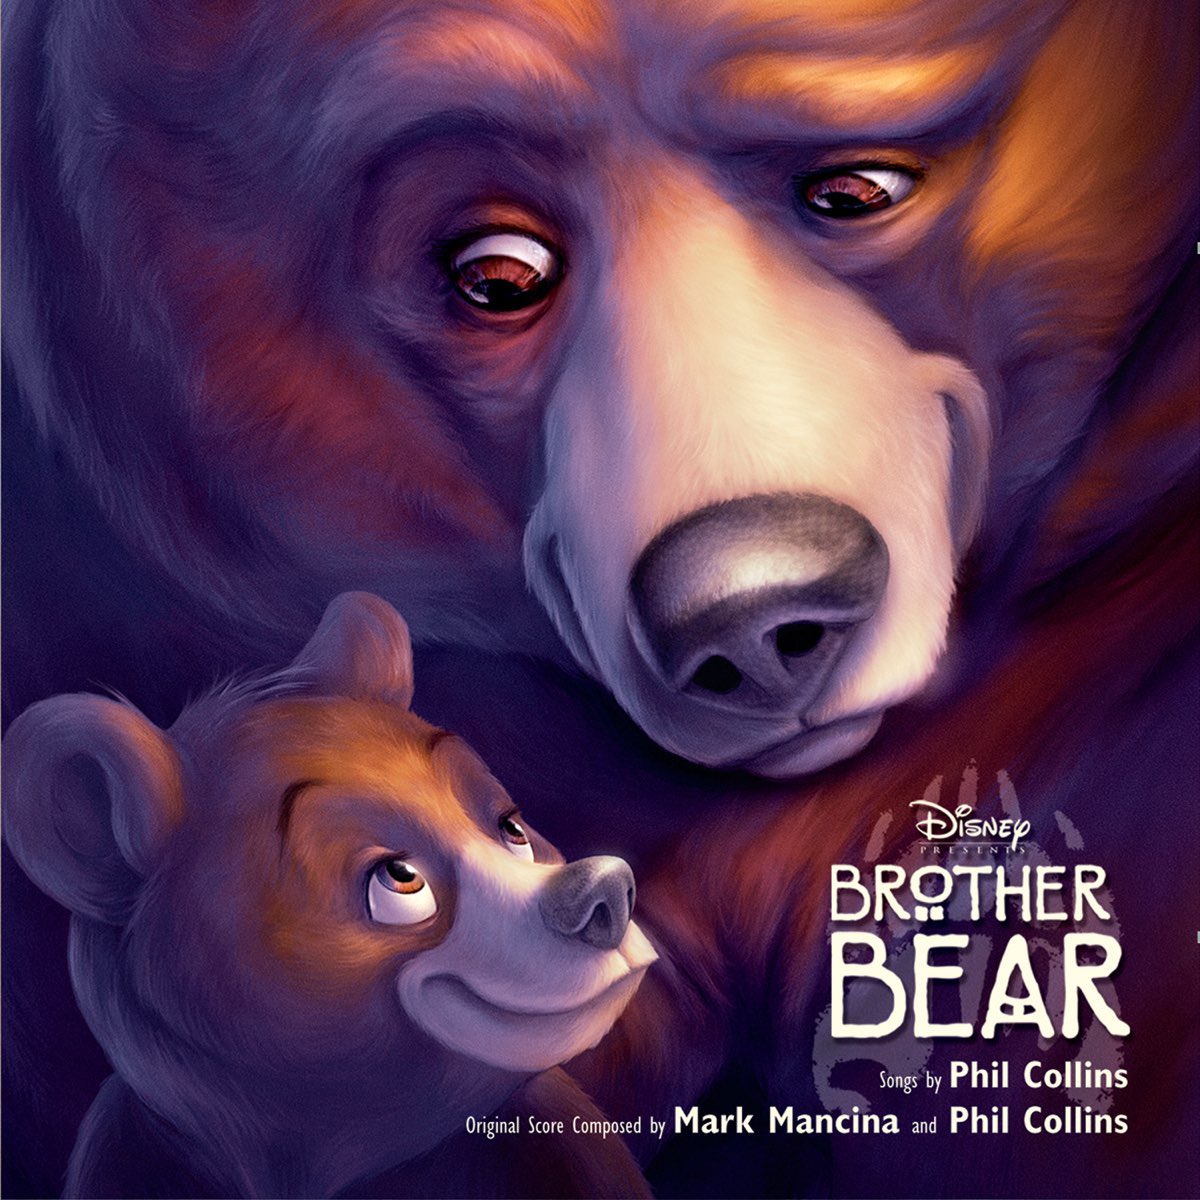 Phil Collins was cooking with gasoline and the fire from a dying star with the soundtracks for Tarzan and Brother Bear